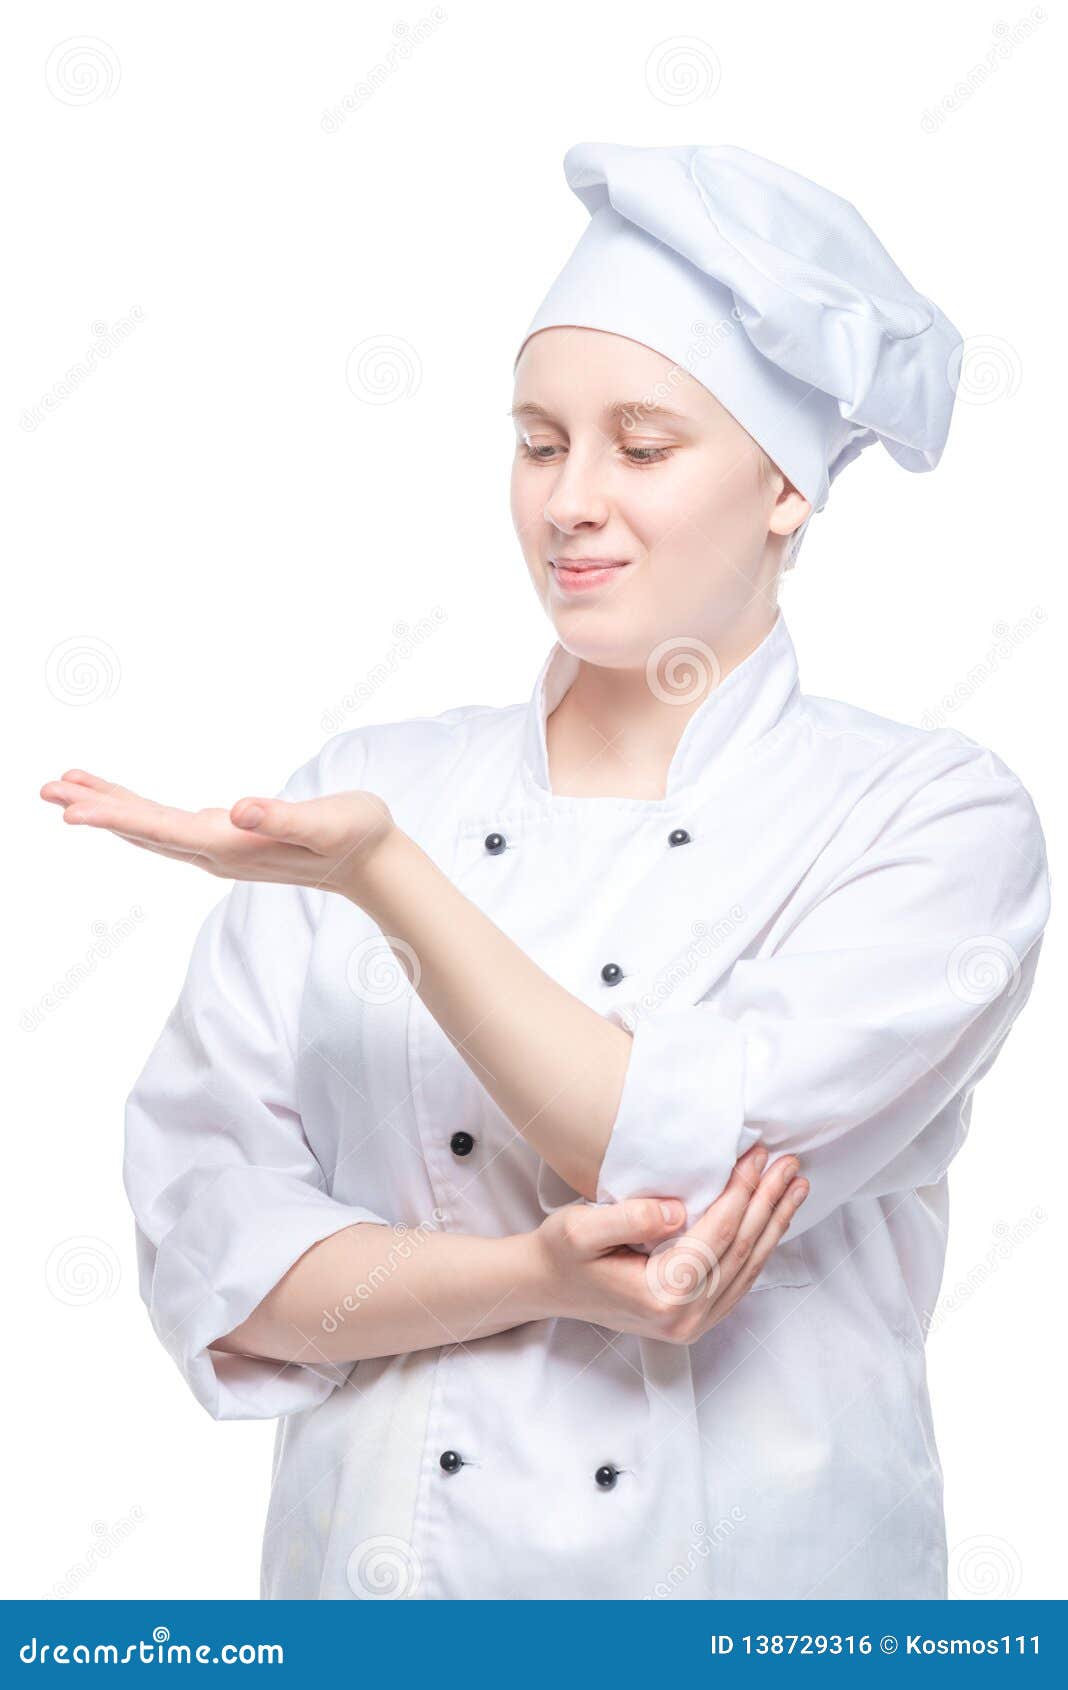 Female Cook Looks at Her Empty Palm, Concept Photo on White Background ...